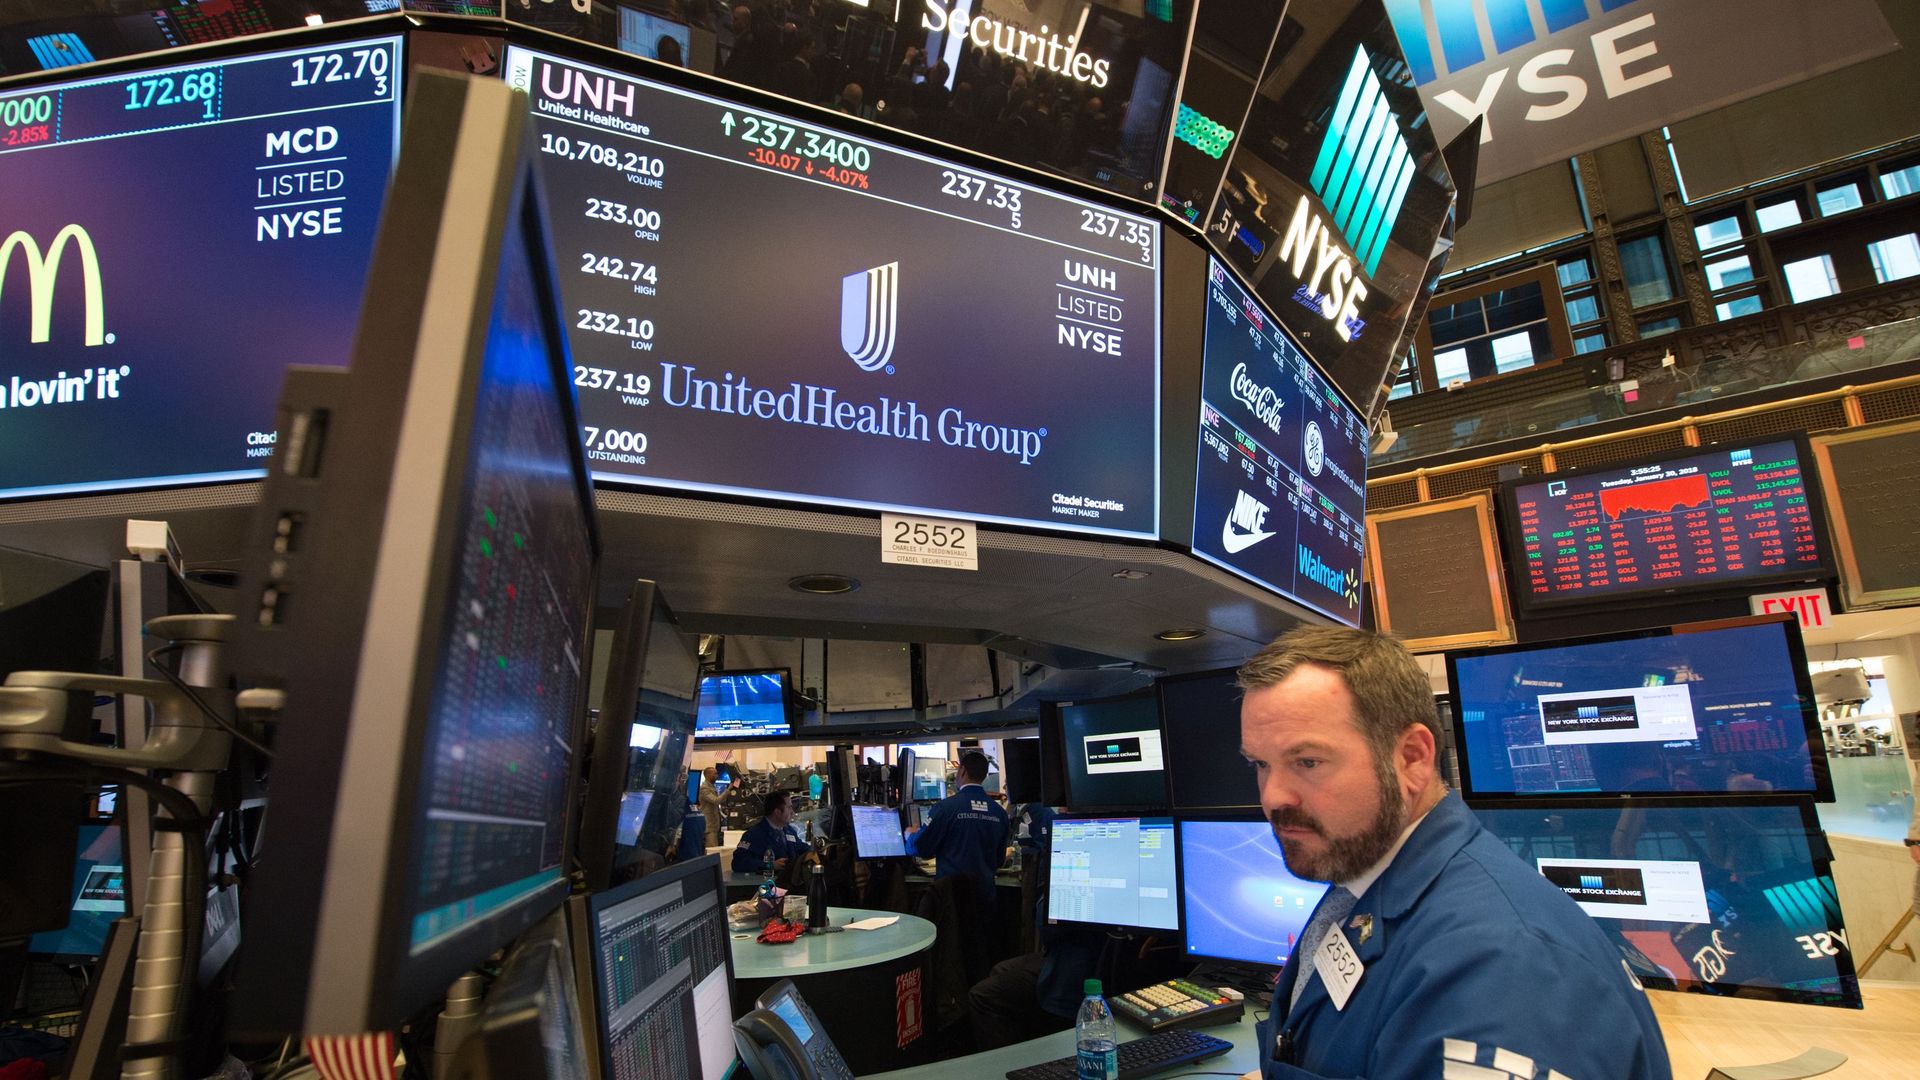 UnitedHealth Group's logo appears on a TV screen on a Wall Street trading floor with a broker standing underneath.